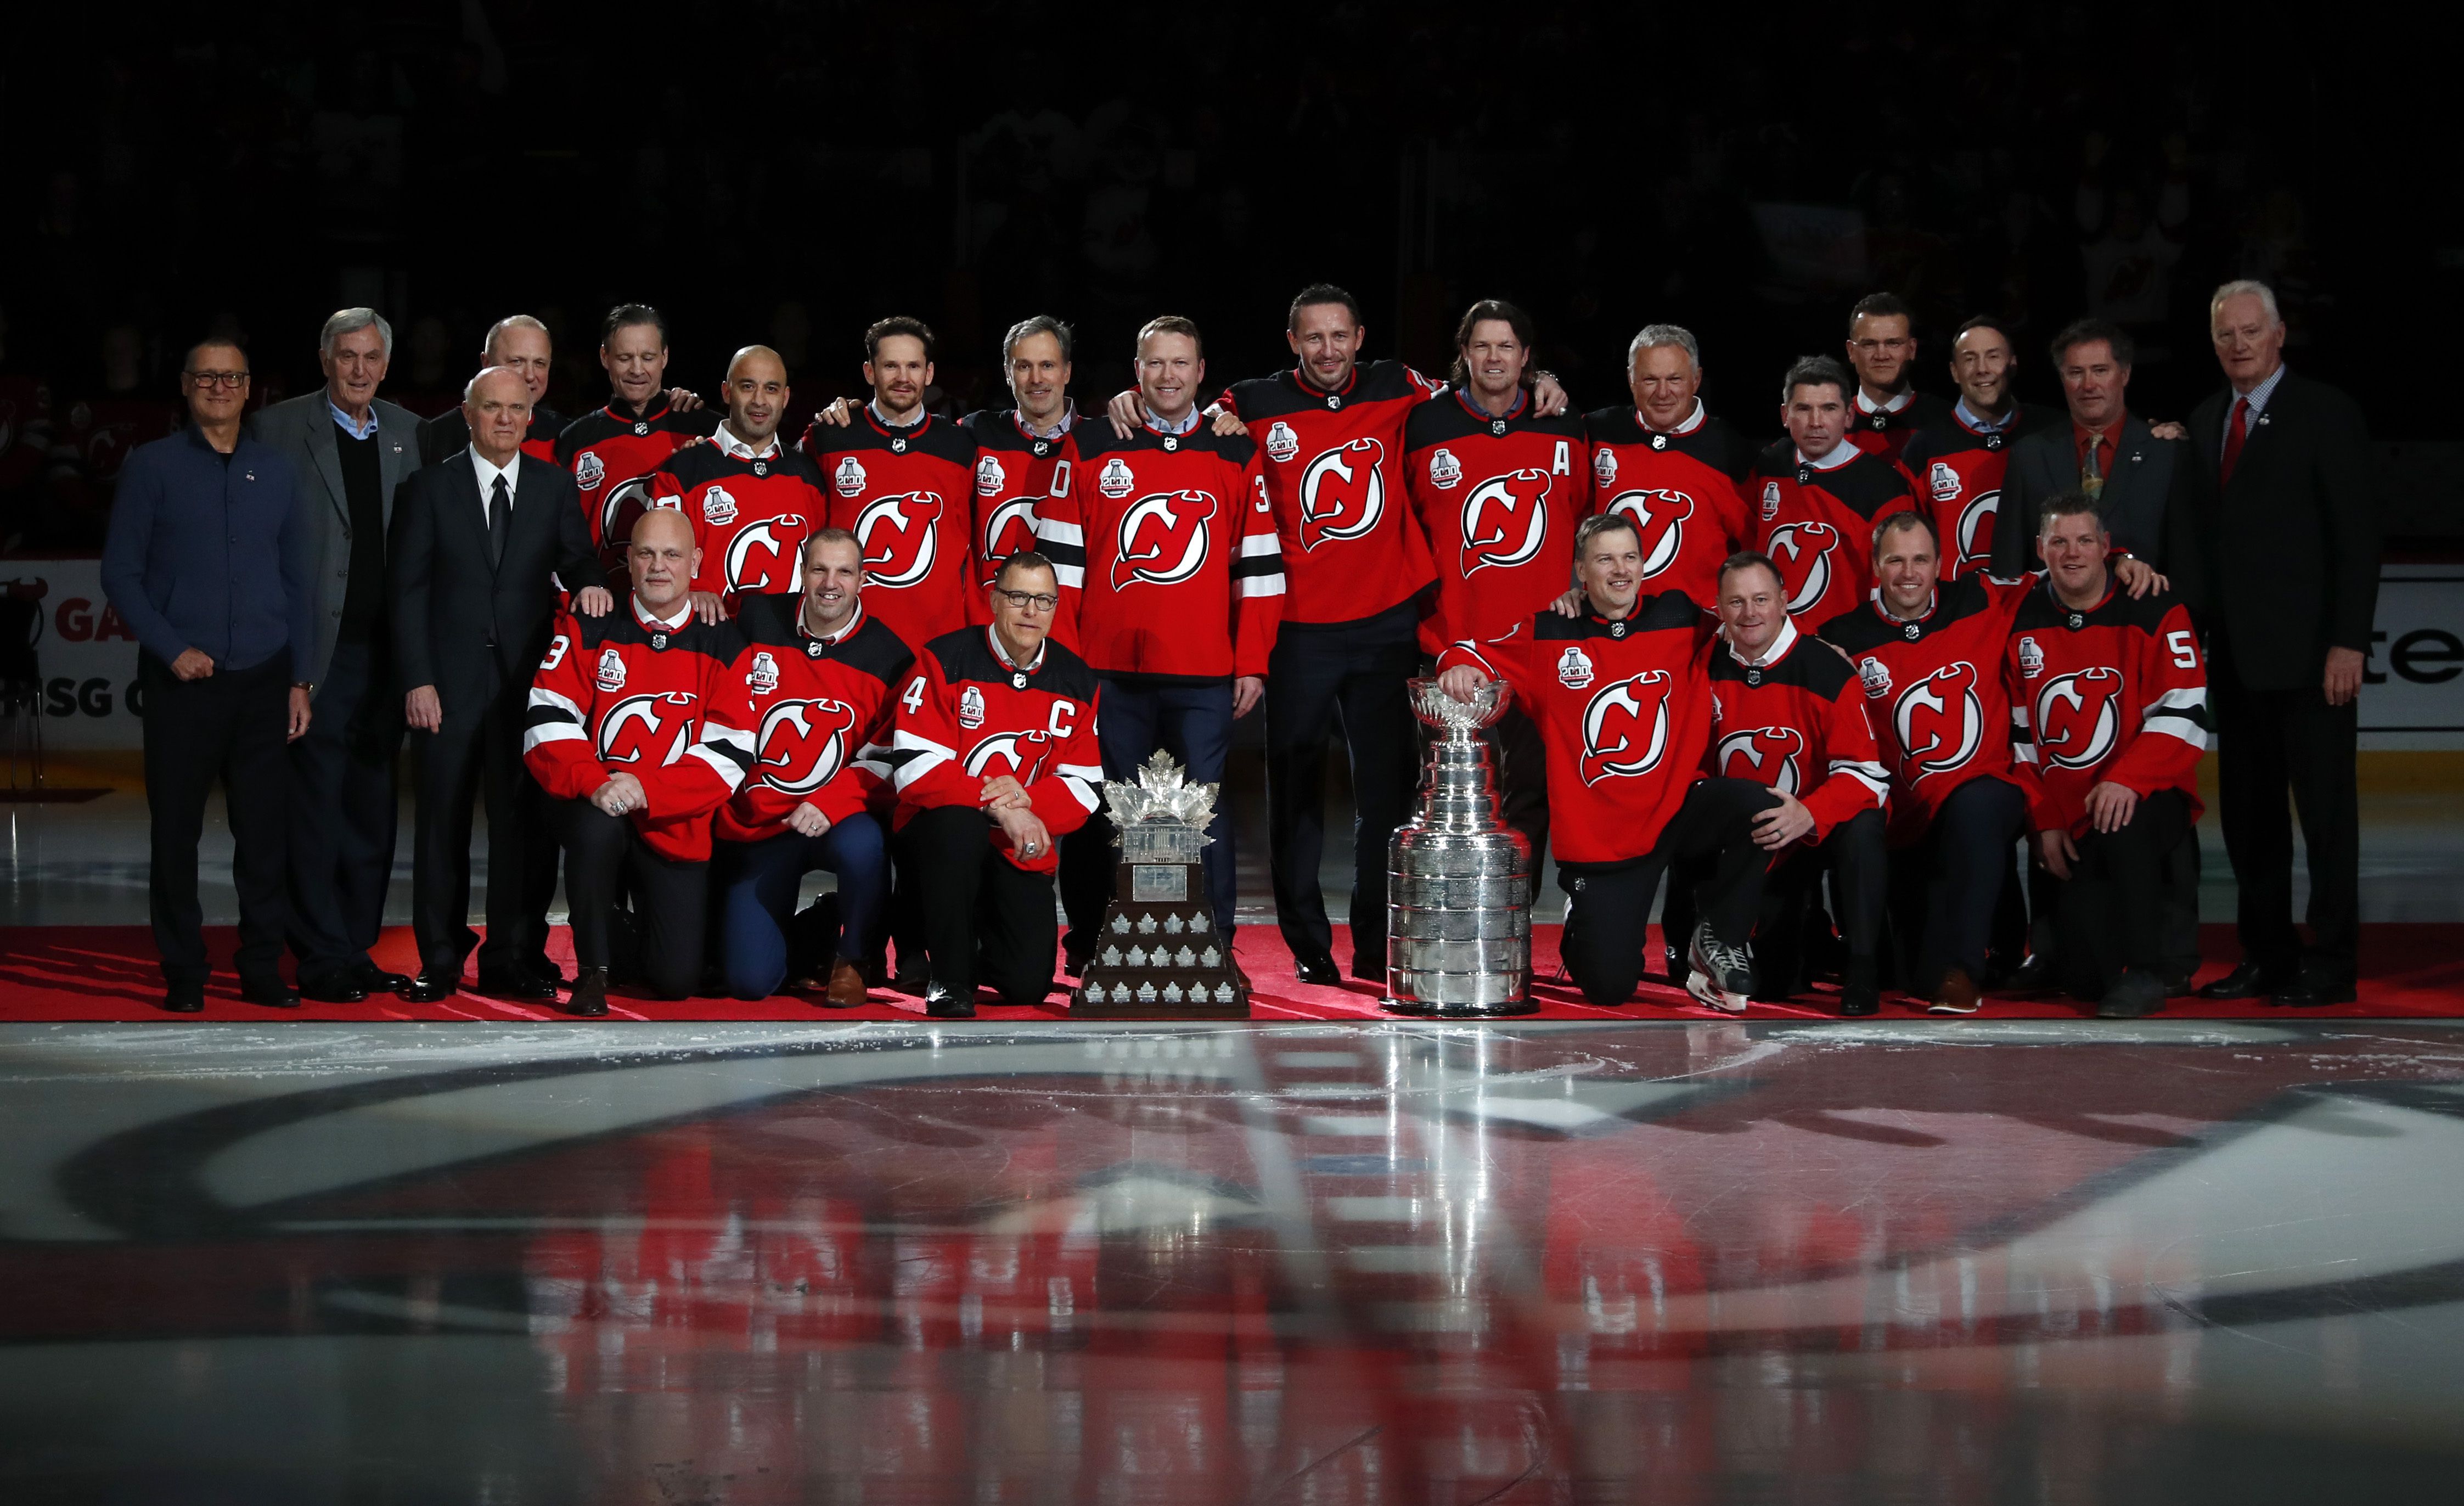 New Jersey Devils news: Team will honor 2000 Stanley Cup champions